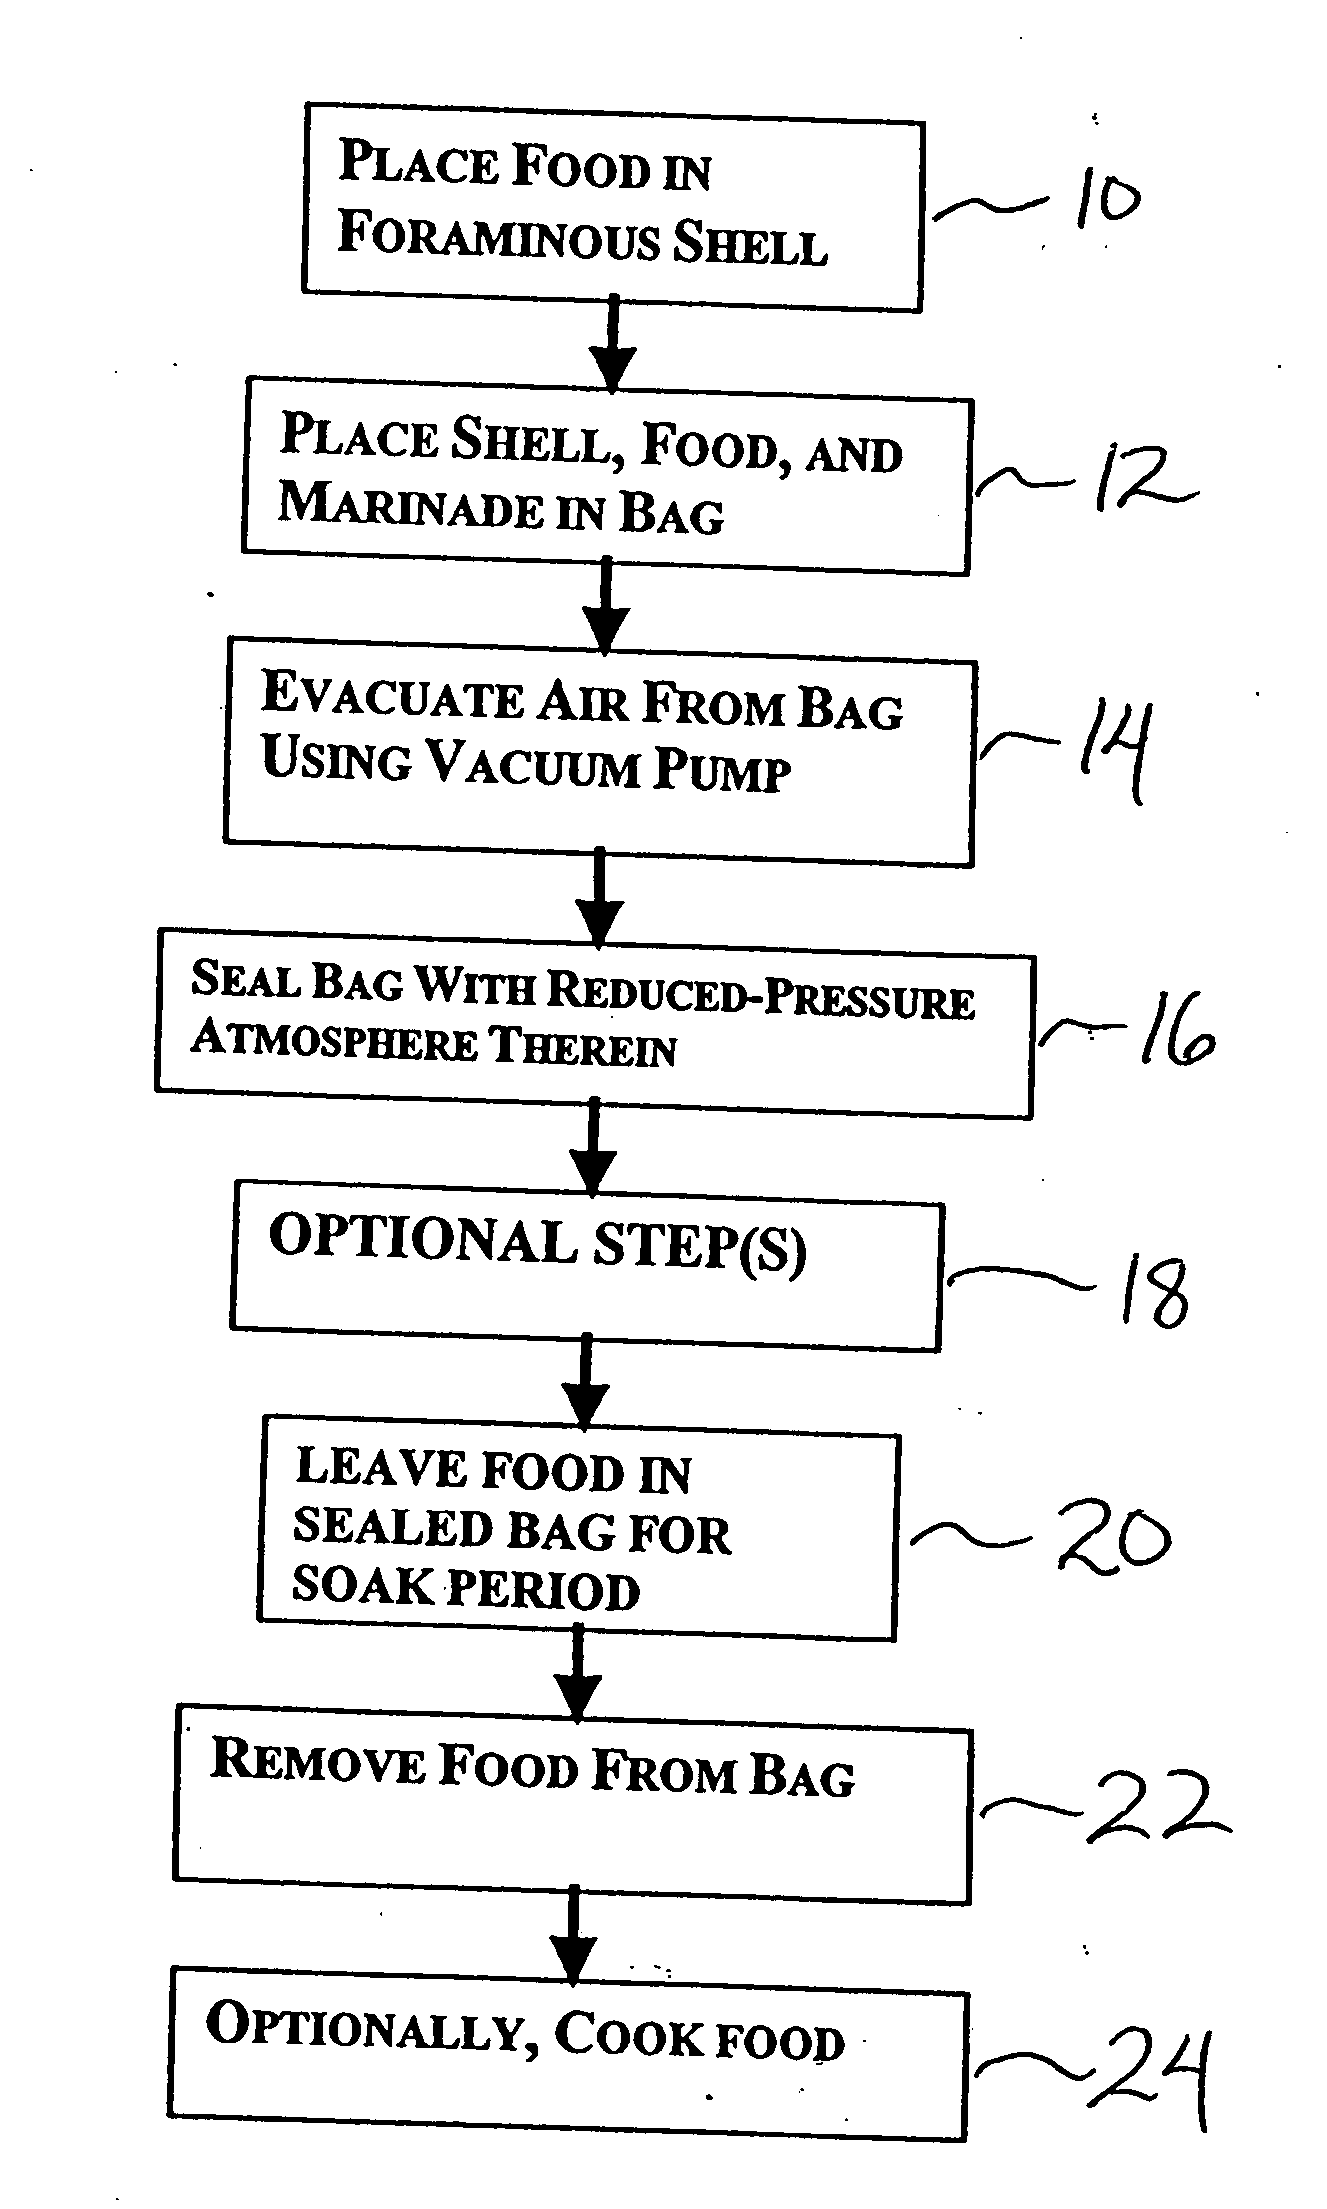 Kit for and method of marinating uncooked food